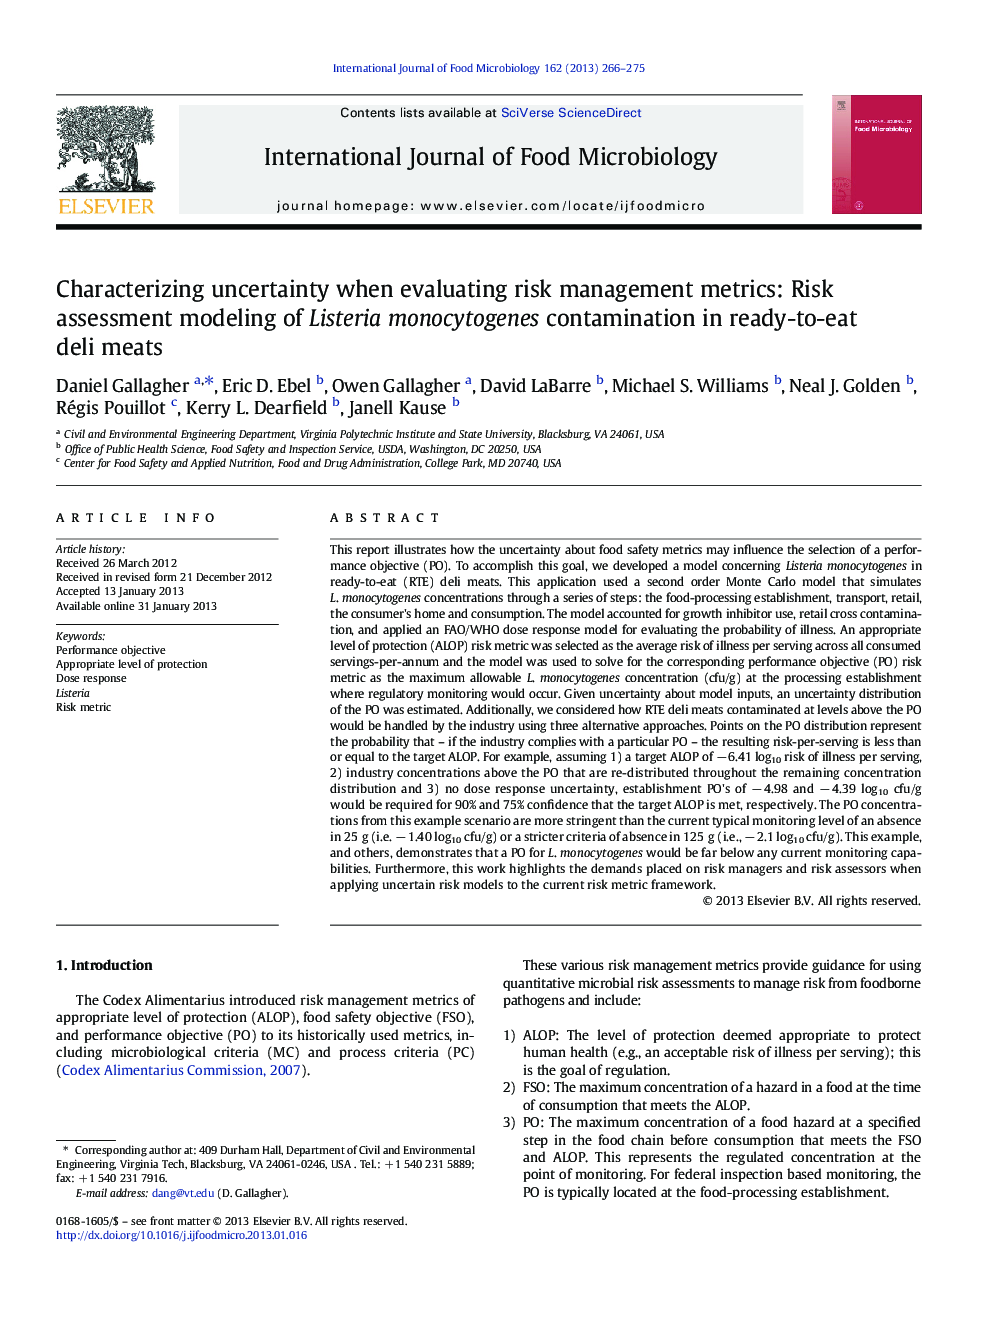 Characterizing uncertainty when evaluating risk management metrics: Risk assessment modeling of Listeria monocytogenes contamination in ready-to-eat deli meats